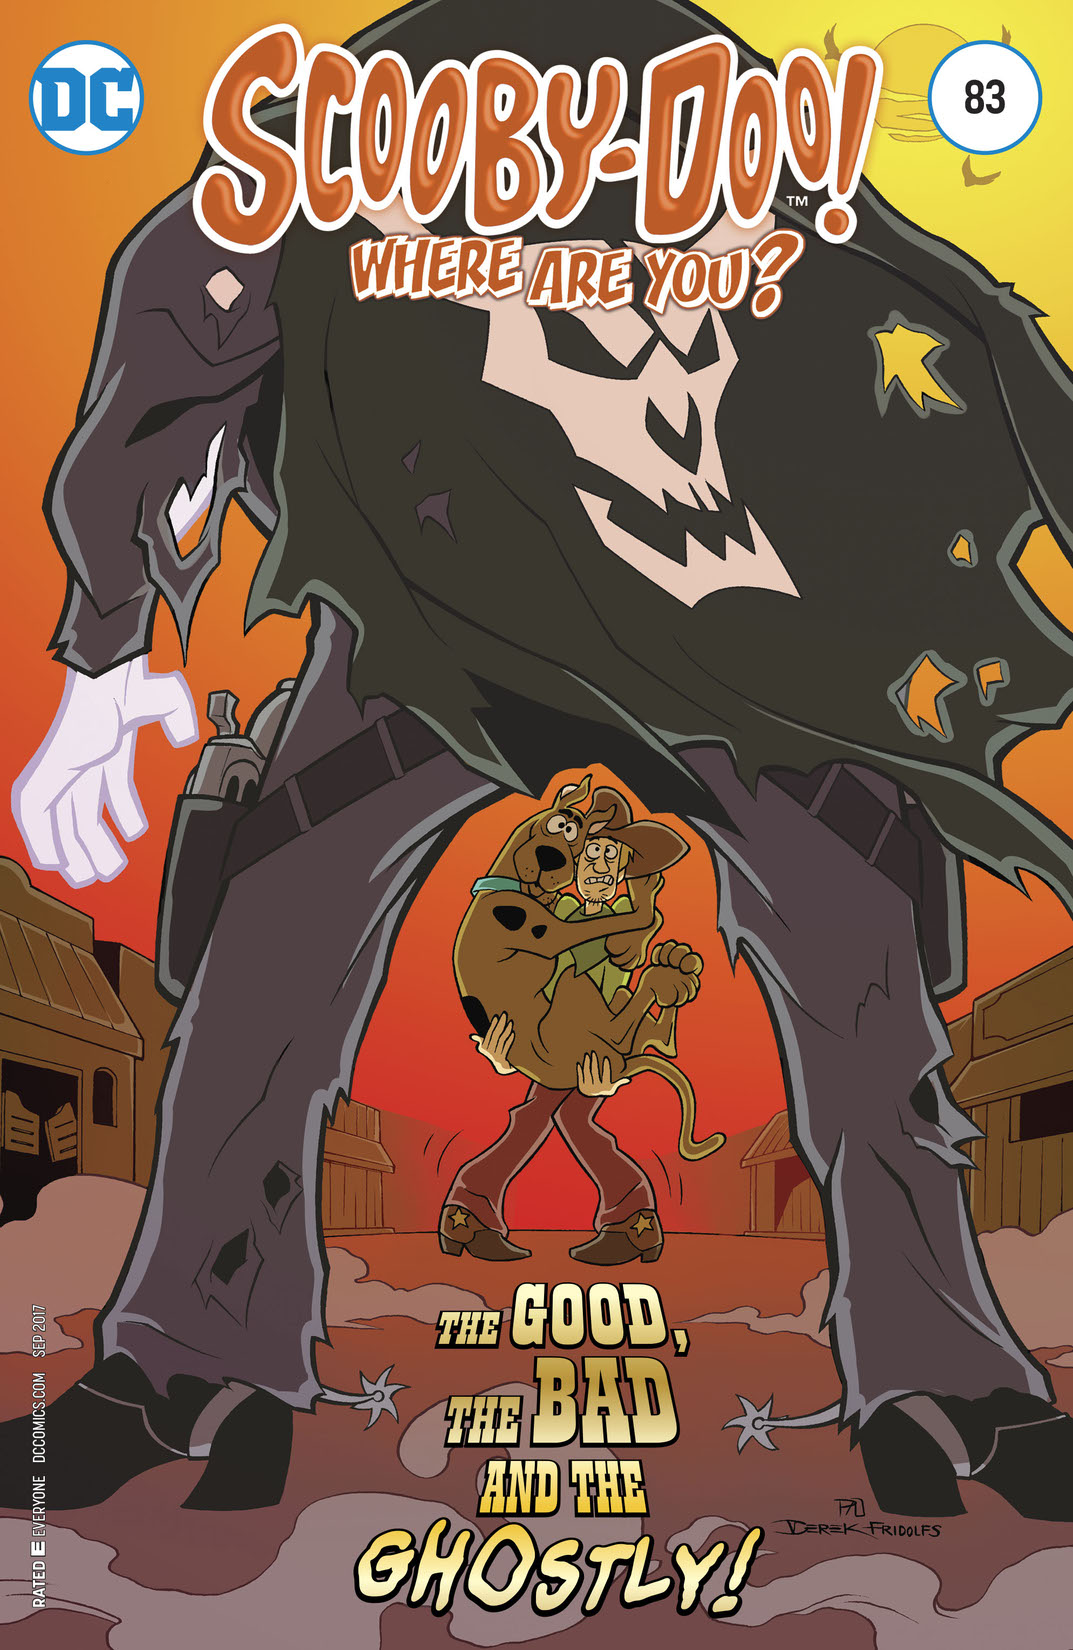 Scooby-Doo, Where Are You? #83 preview images